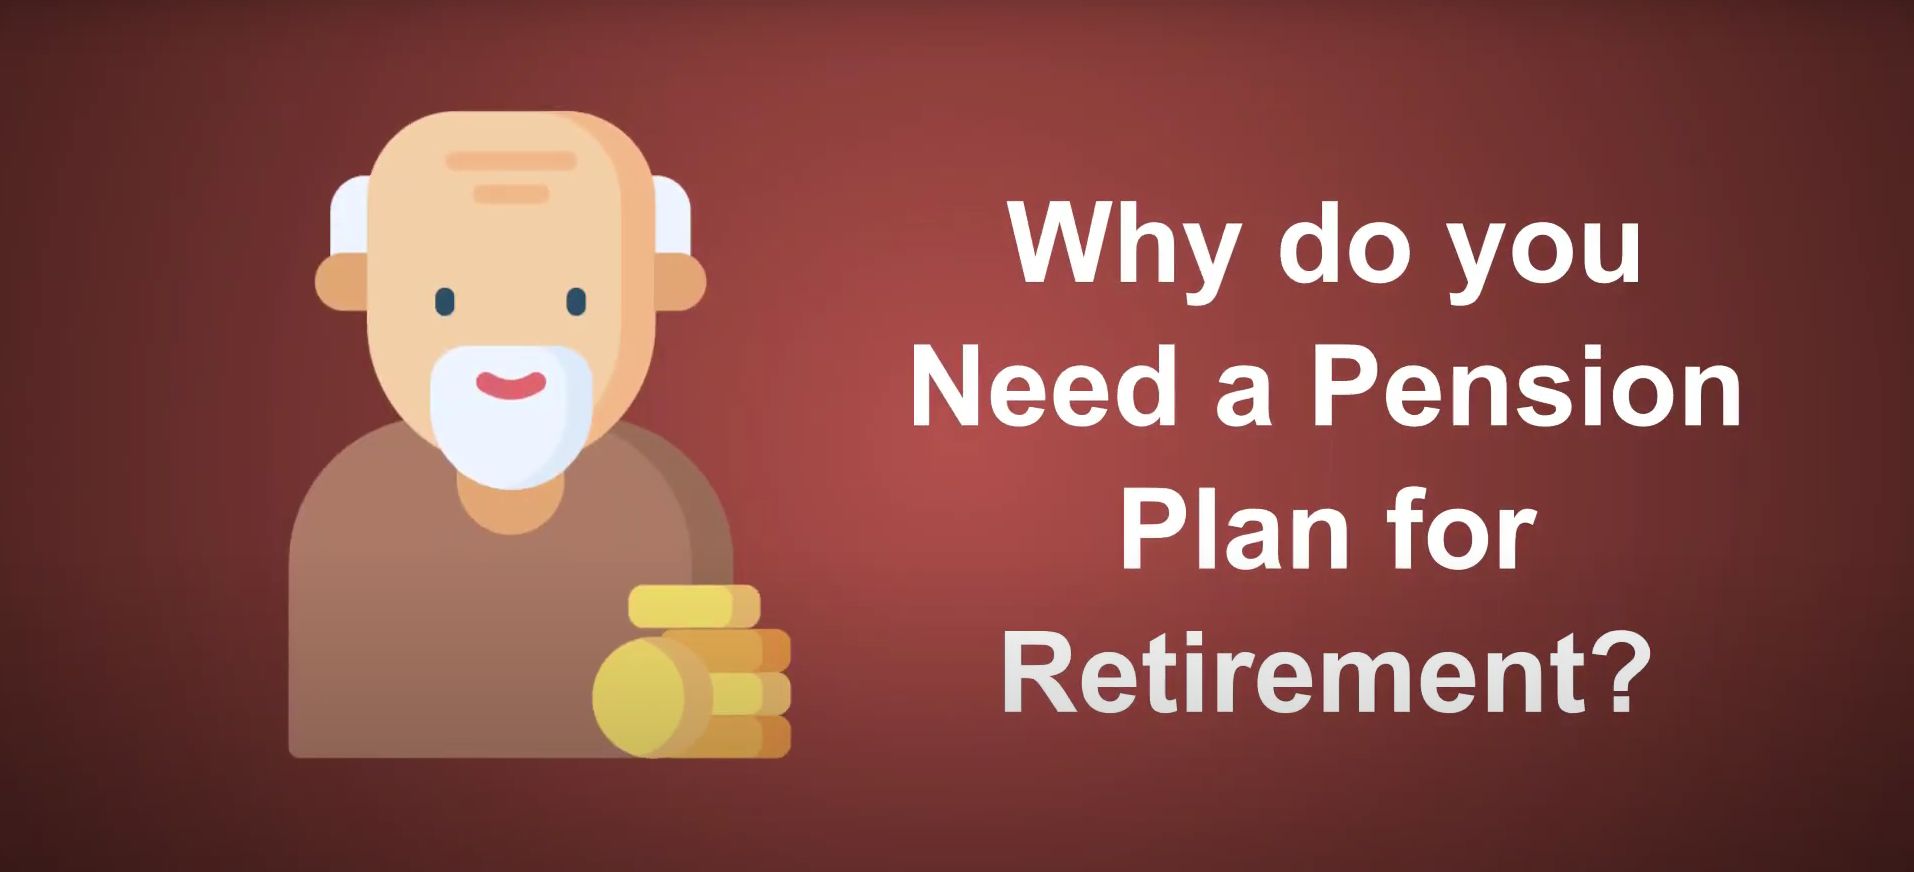 Why do you Need a Pension Plan for Retirement